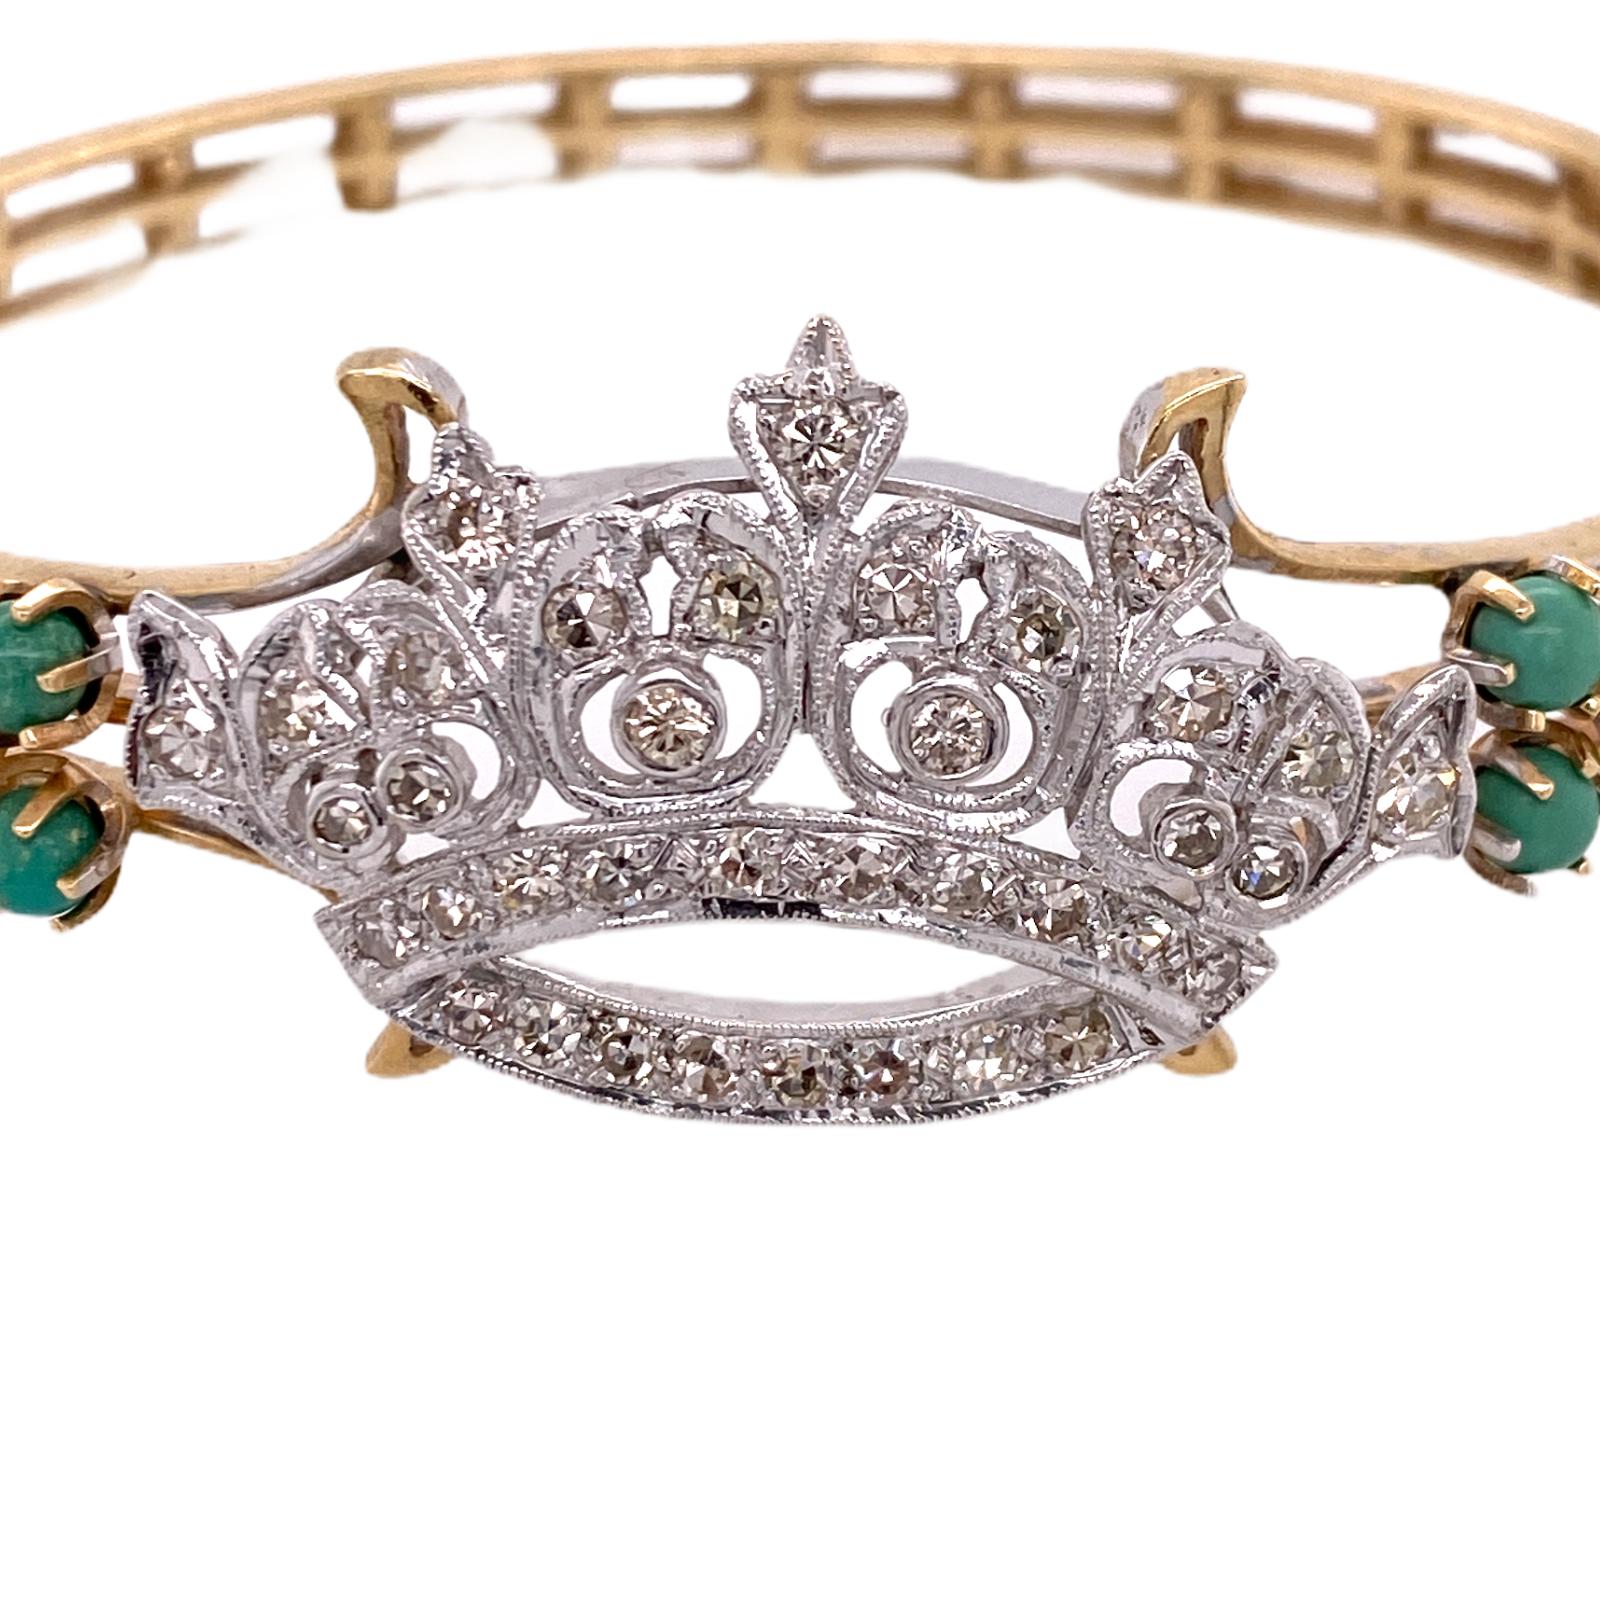 Beautiful 1950's diamond crown bangle bracelet fashioned in 14 karat yellow gold. The crown features 39 single and round brilliant cut diamonds weighing approximately 1.20 carat total weight and graded H-I color and SI clarity. The crown is flanked